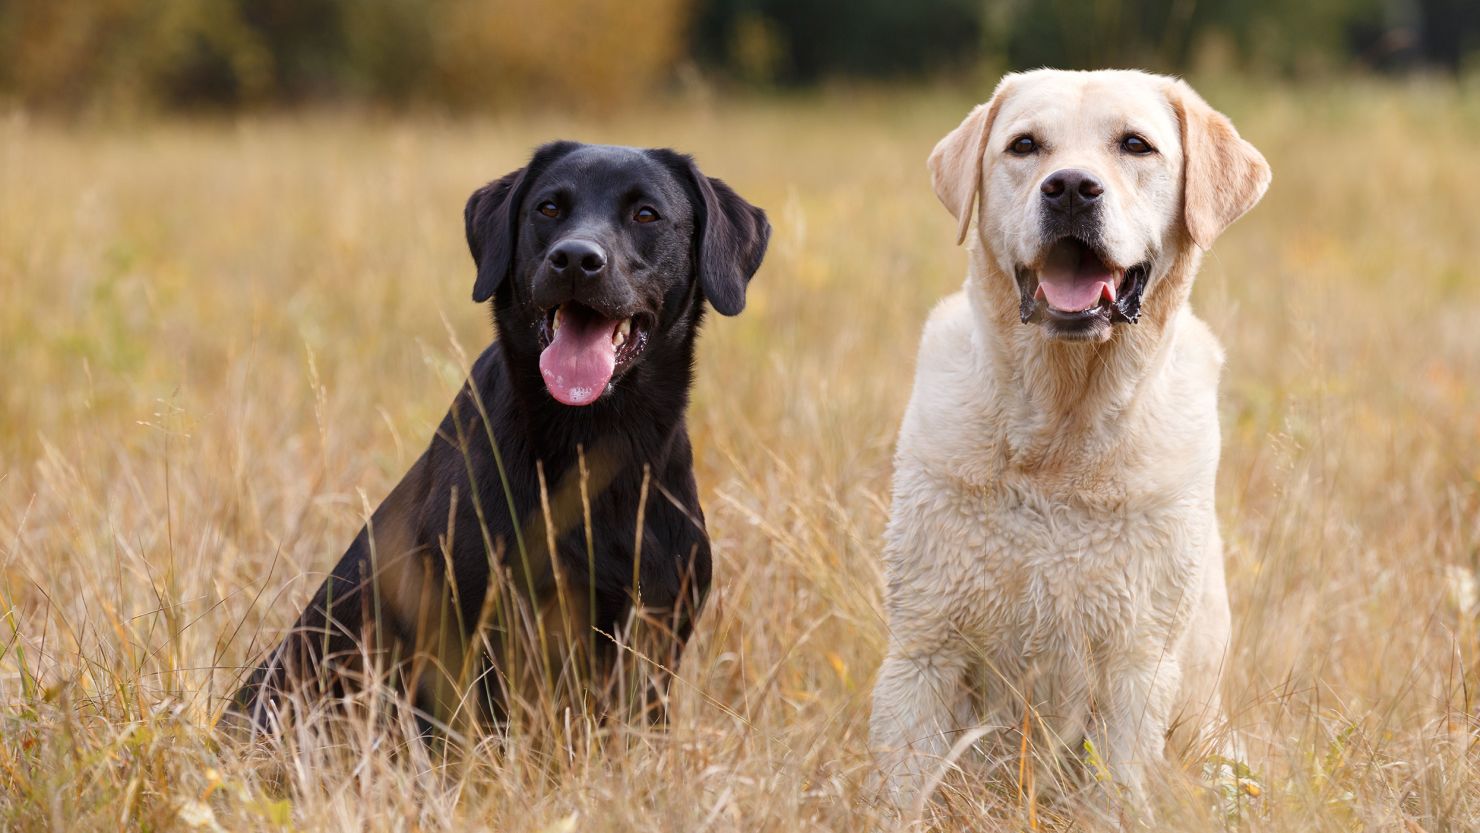 The Labrador retriever, a breed that originated in Canada, is the most popular dog of 2021.